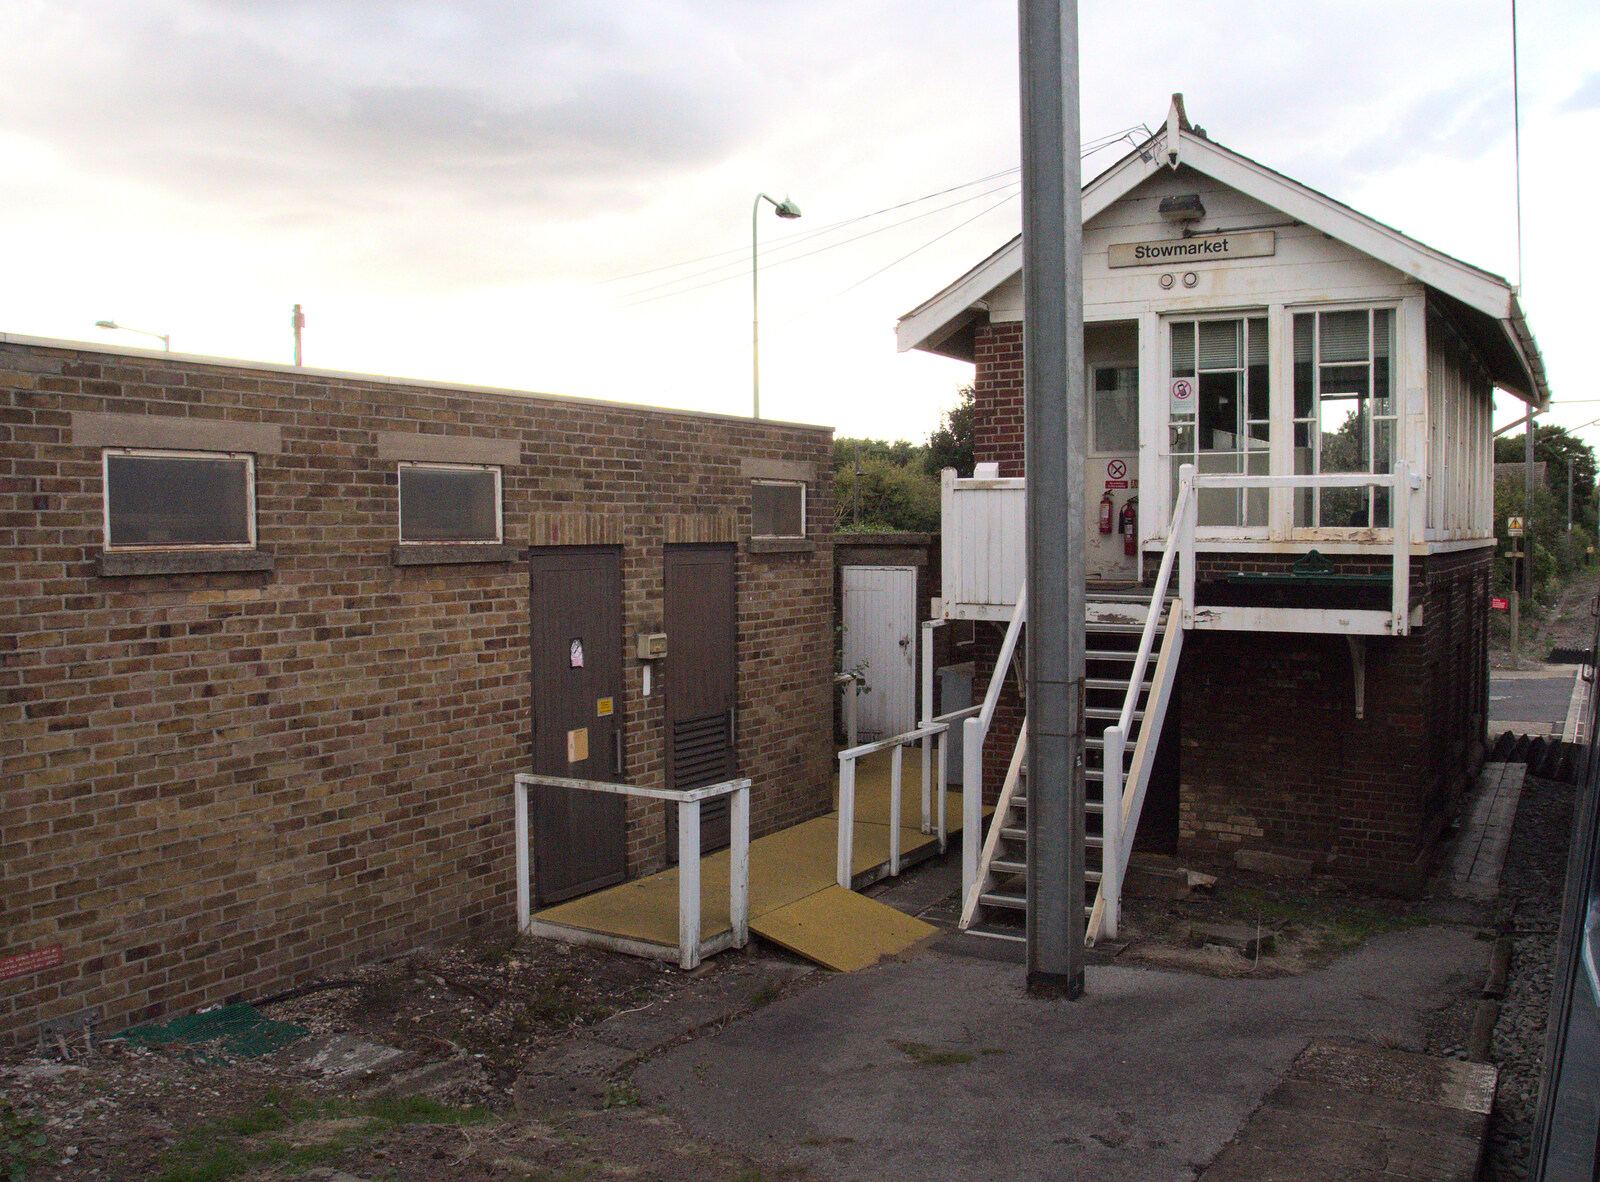 Stowmarket signal box, as the train finally gets going from Train Fails, and Pizza Pub, Manningtree and Southwark - 12th August 2014